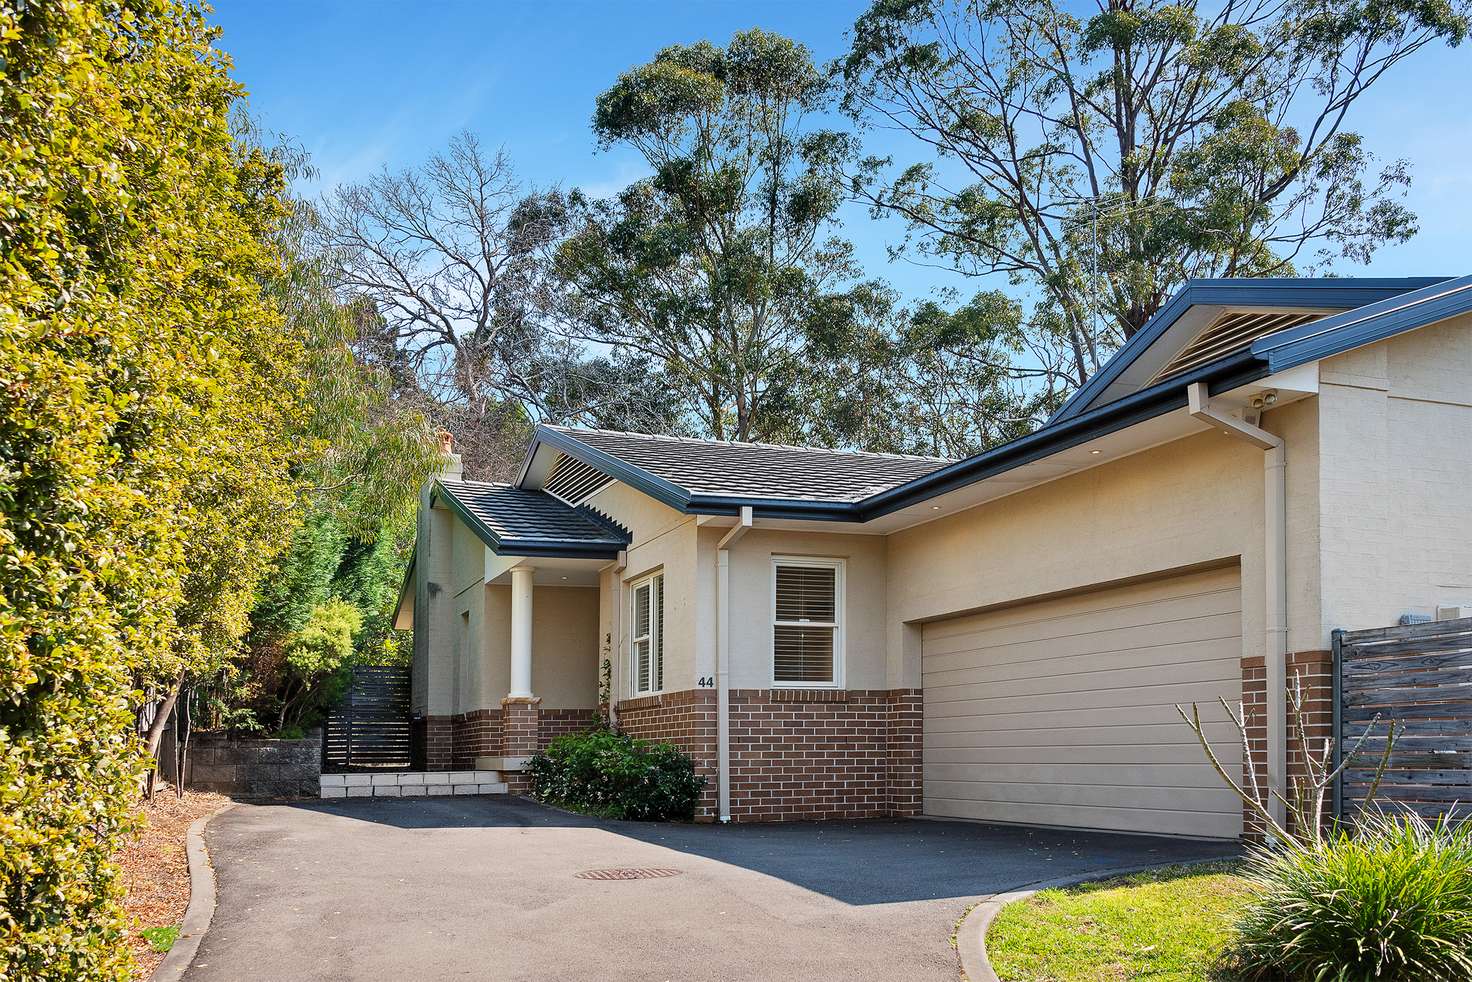 Main view of Homely house listing, 44 Kulgoa Road, Pymble NSW 2073